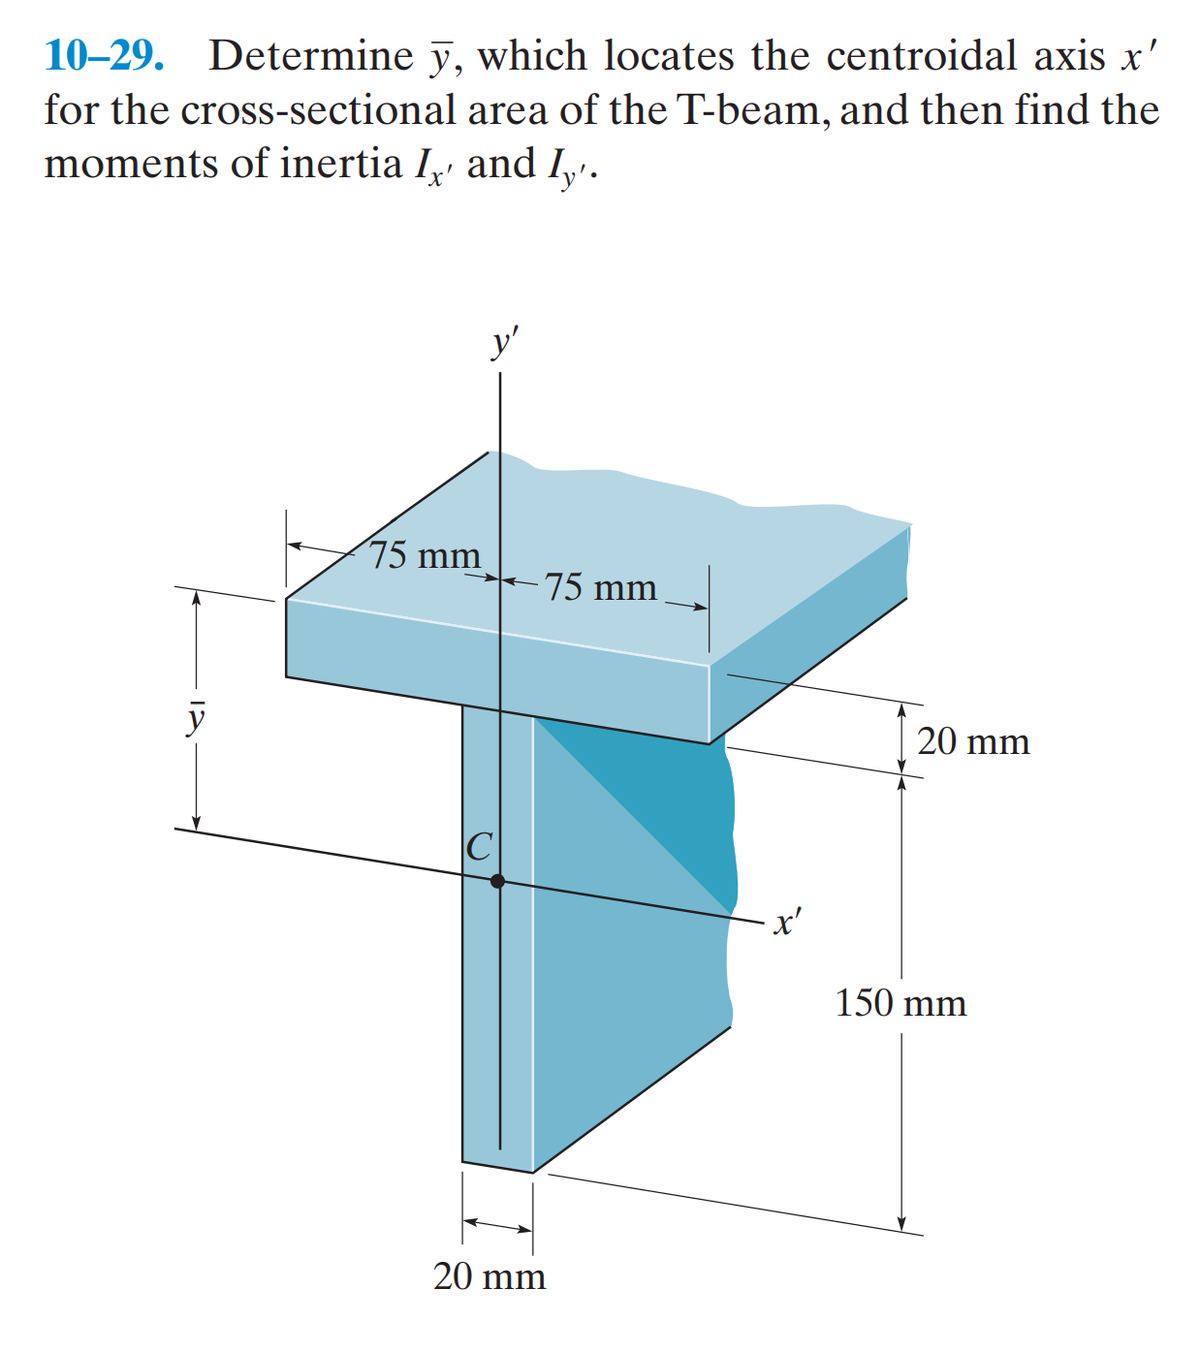 10-29. Determine y, which locates the centroidal axis x'
for the cross-sectional area of the T-beam, and then find the
moments of inertia I, and I'.
75 mm
75 mm
20 mm
y
20 mm
'x'
150 mm